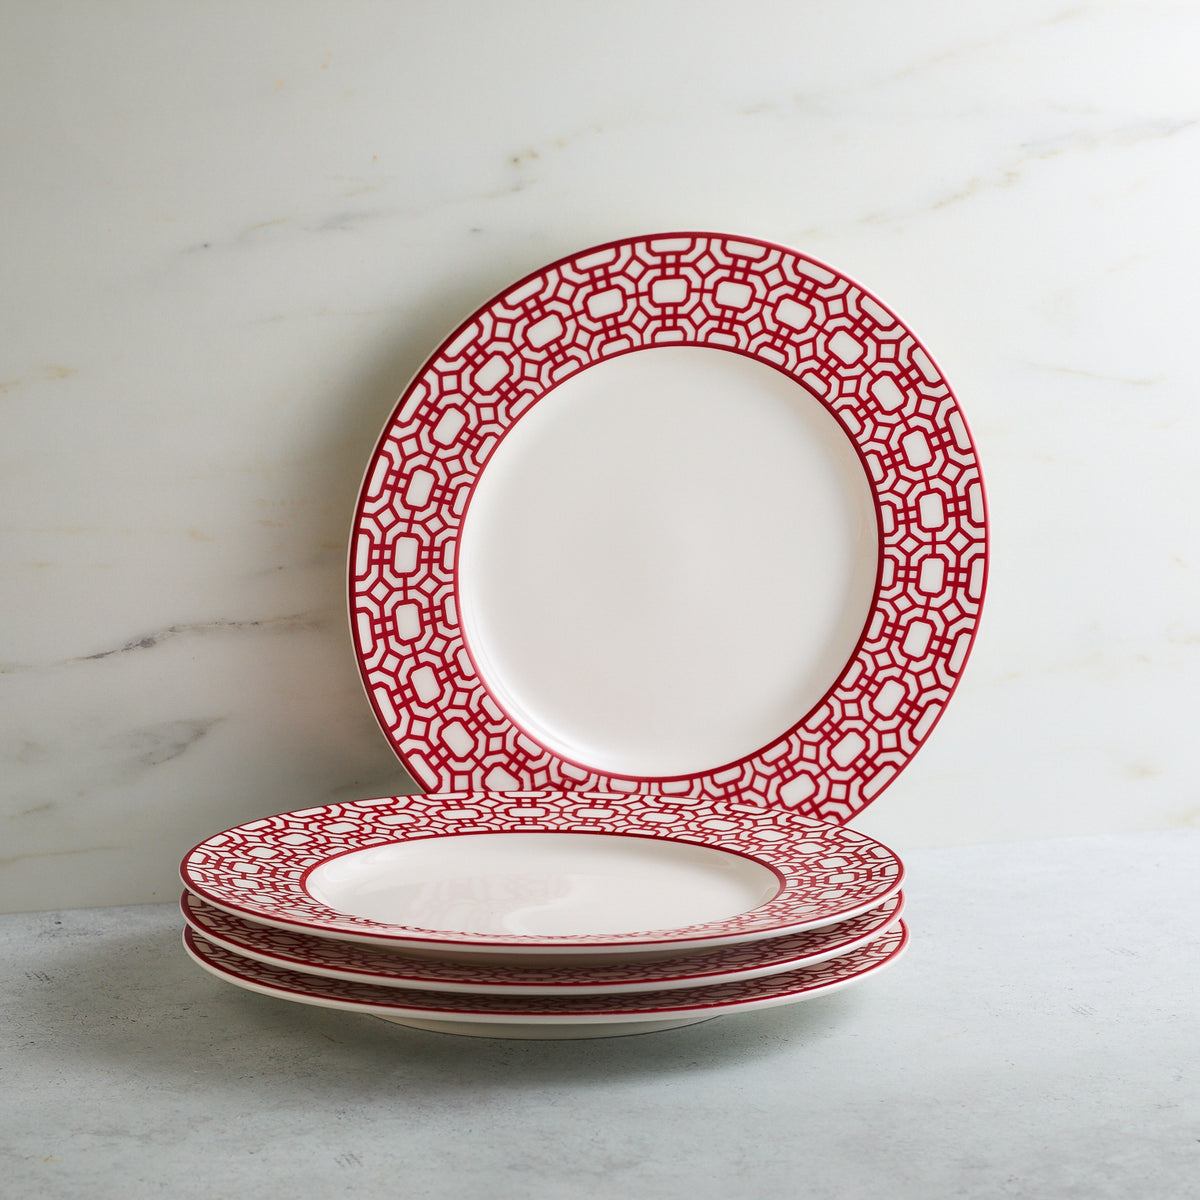 Four white ceramic salad plates with red geometric patterns are stacked on a light grey surface against a white marble background. One premium porcelain plate, the Caskata Artisanal Home Newport Garden Gate Crimson Rimmed Salad Plate, stands upright at the back.